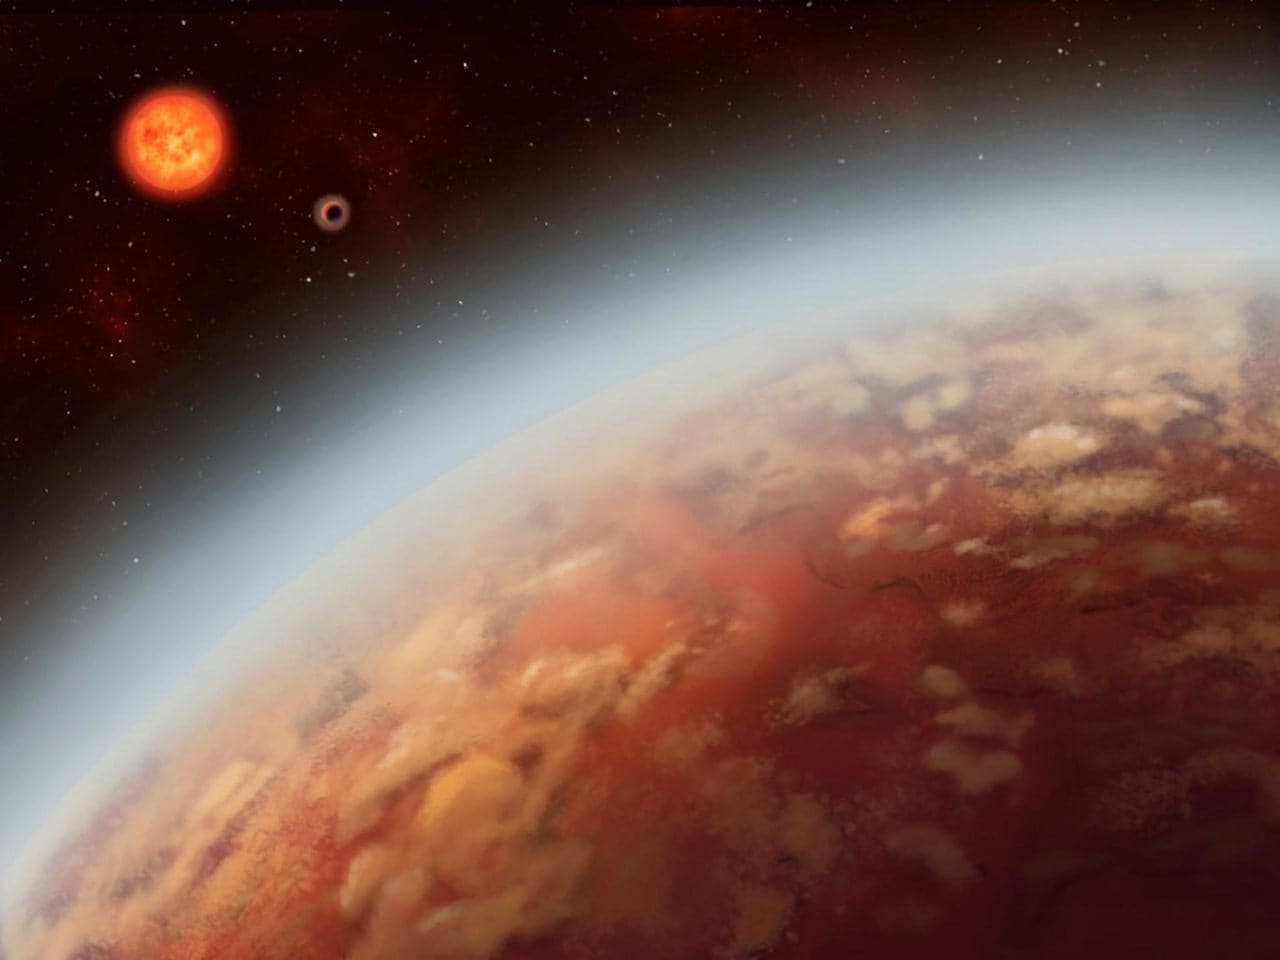 Artist’s concept showing two super-Earth exoplanets, K2-18b and c, orbiting the red dwarf star K2-18. Image credit: Alex Boersma